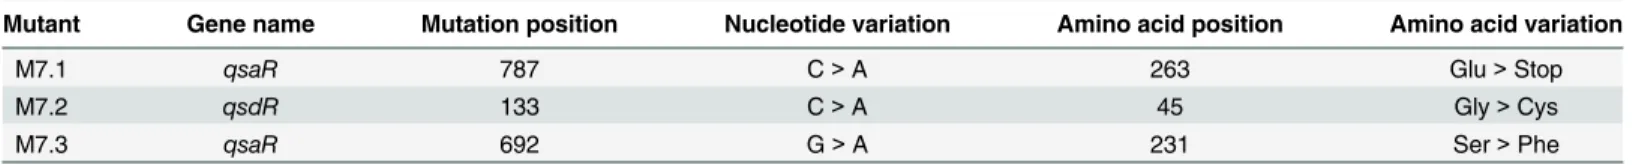 Table 1. Characteristics of bacterial derivatives M7.1, M7.2 and M7.3.